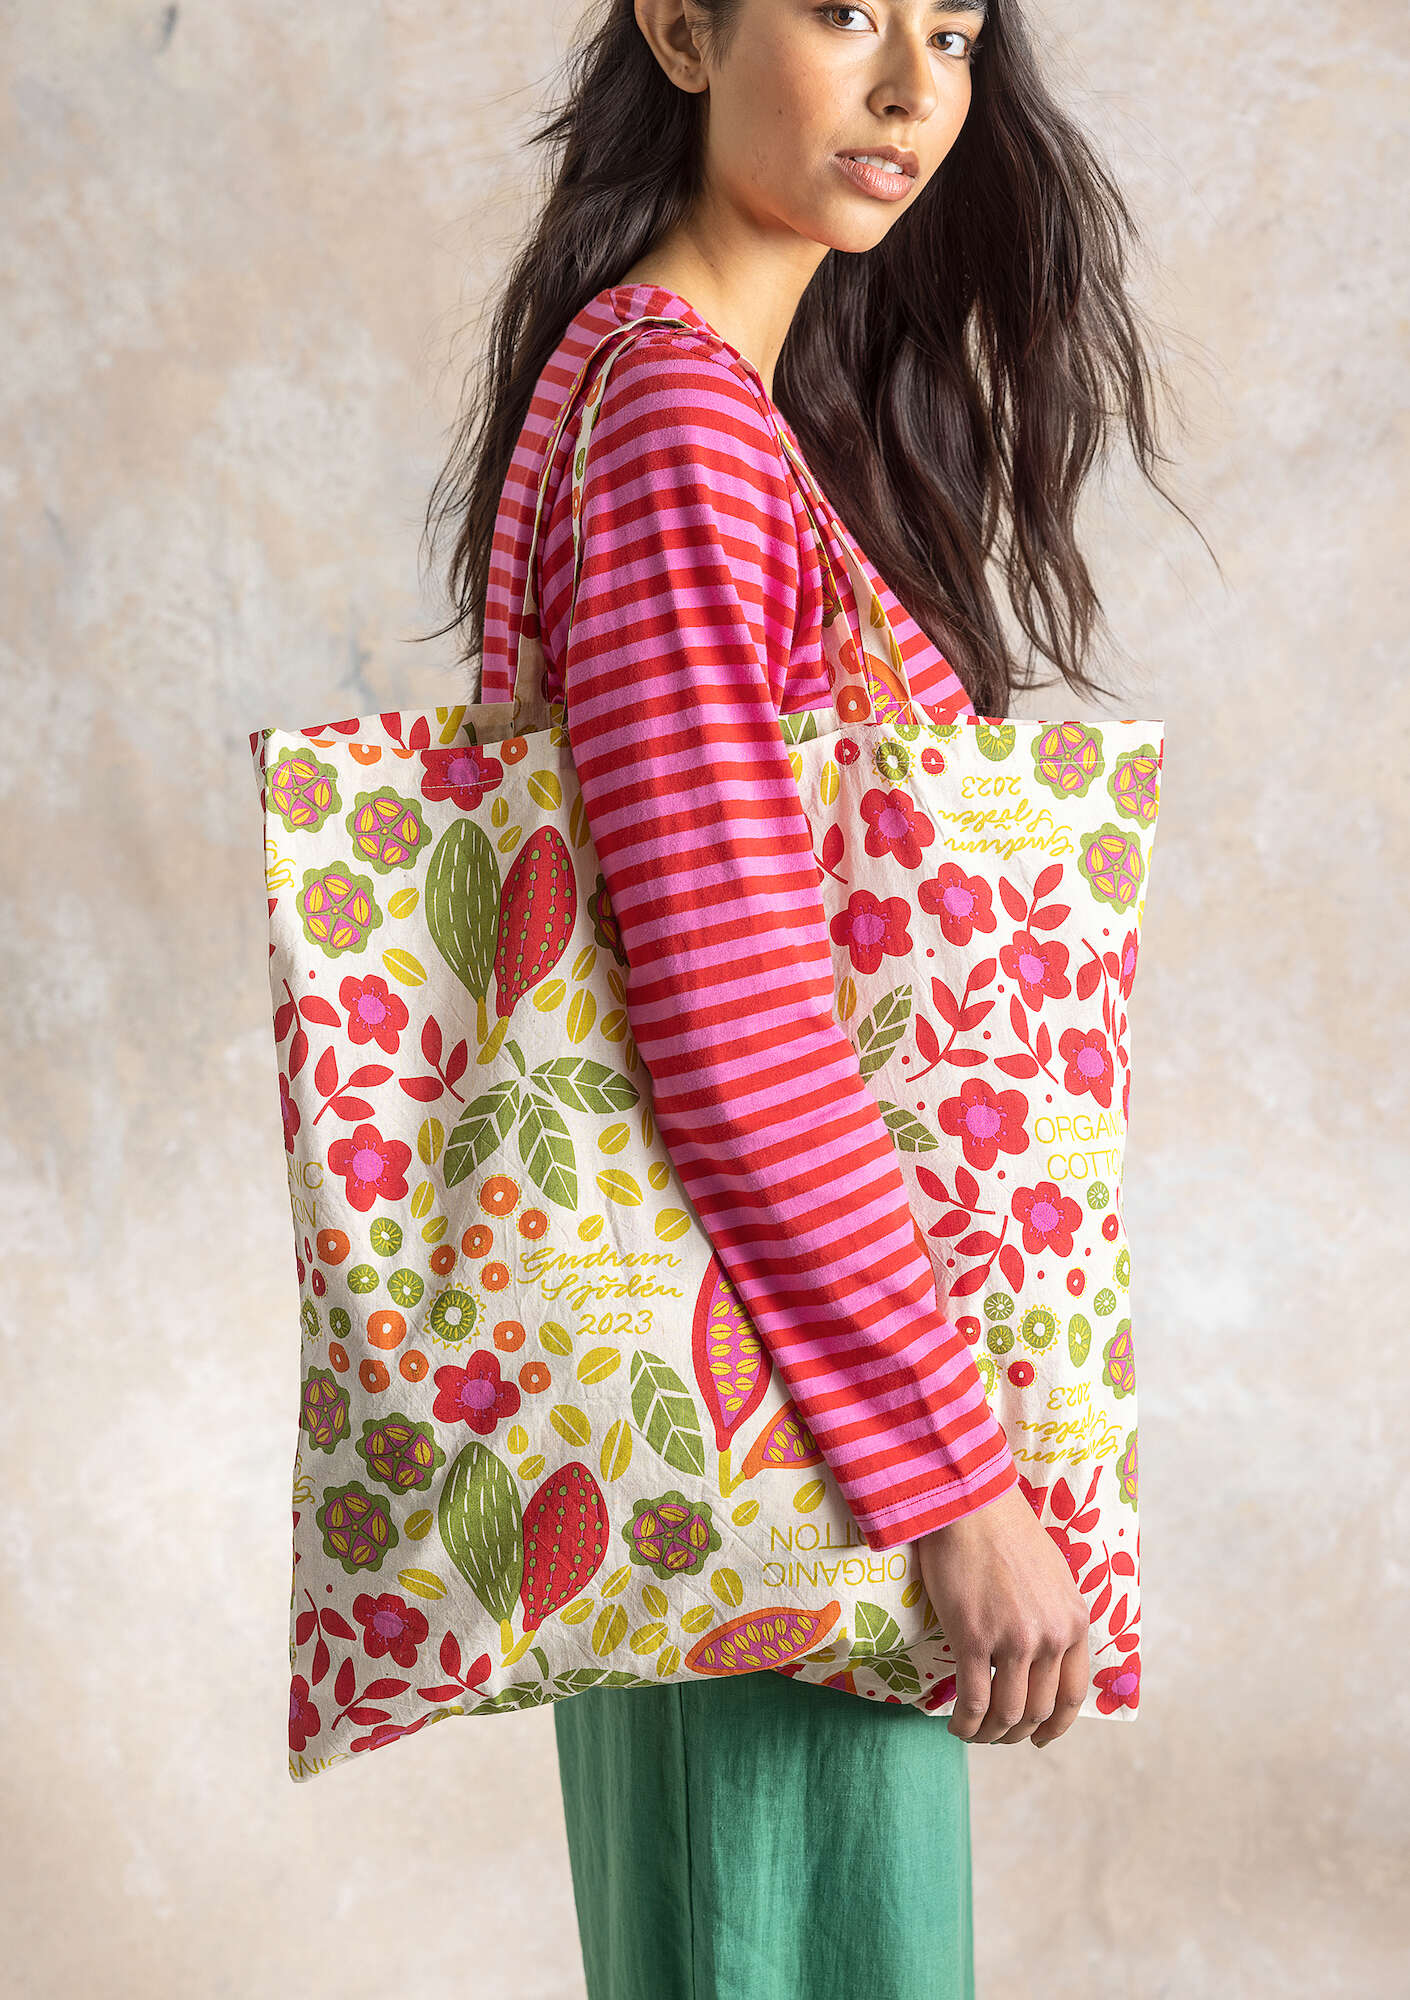 Fabric tote bag L in organic cotton parrot red thumbnail